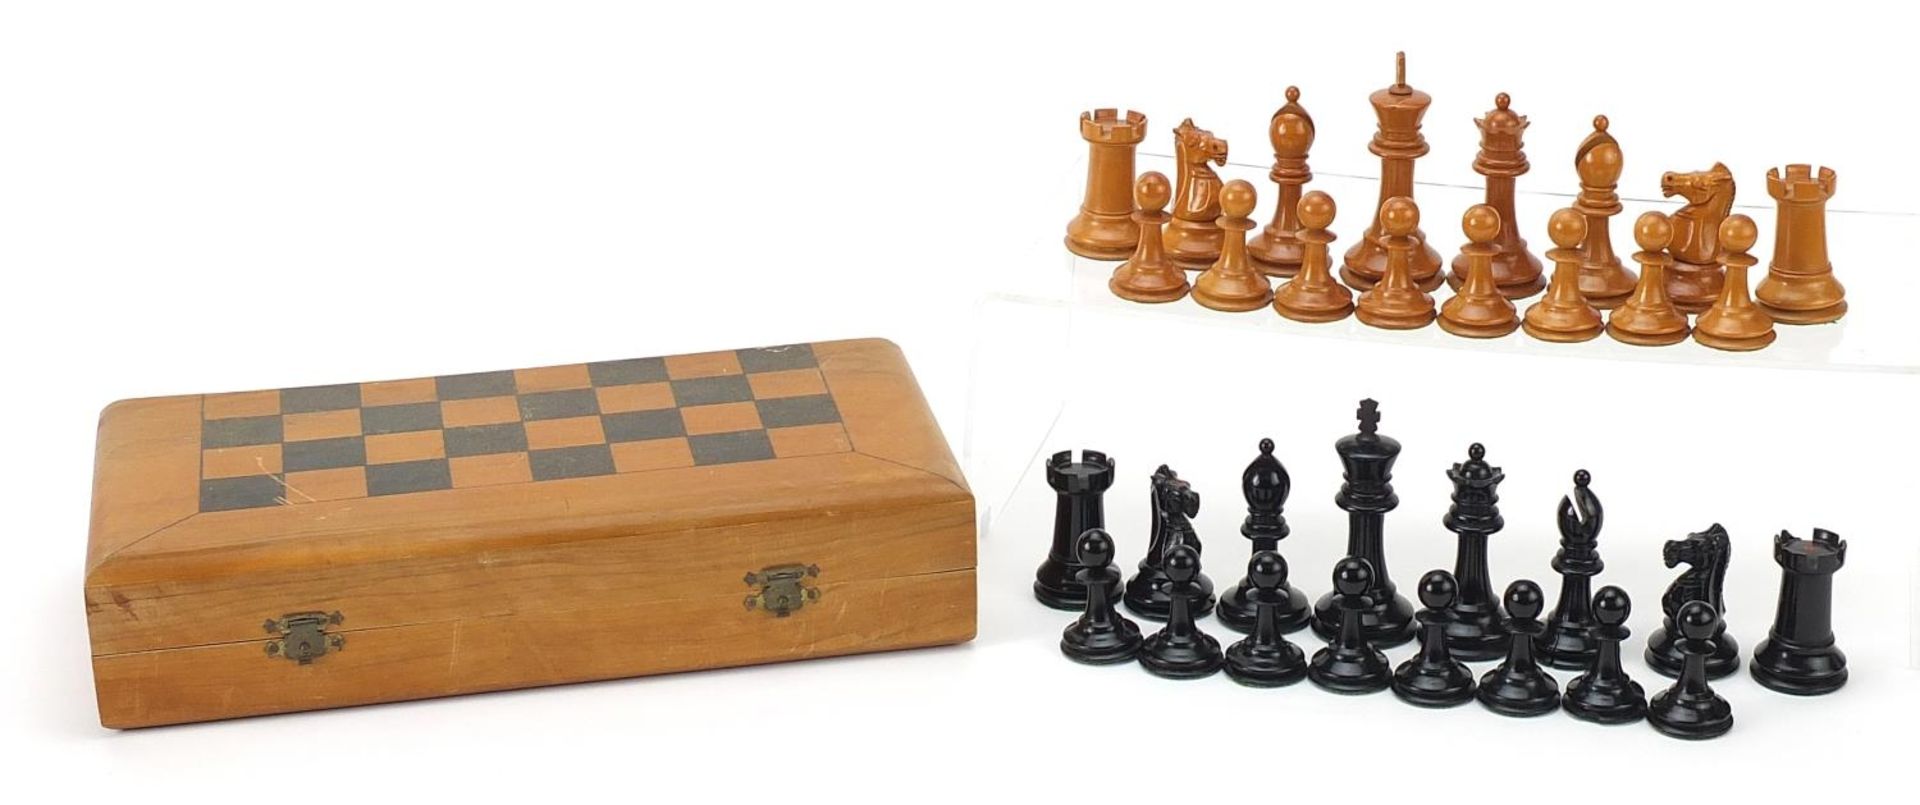 Ebony and boxwood Staunton pattern chess set with folding board, the largest pieces each 8cm high